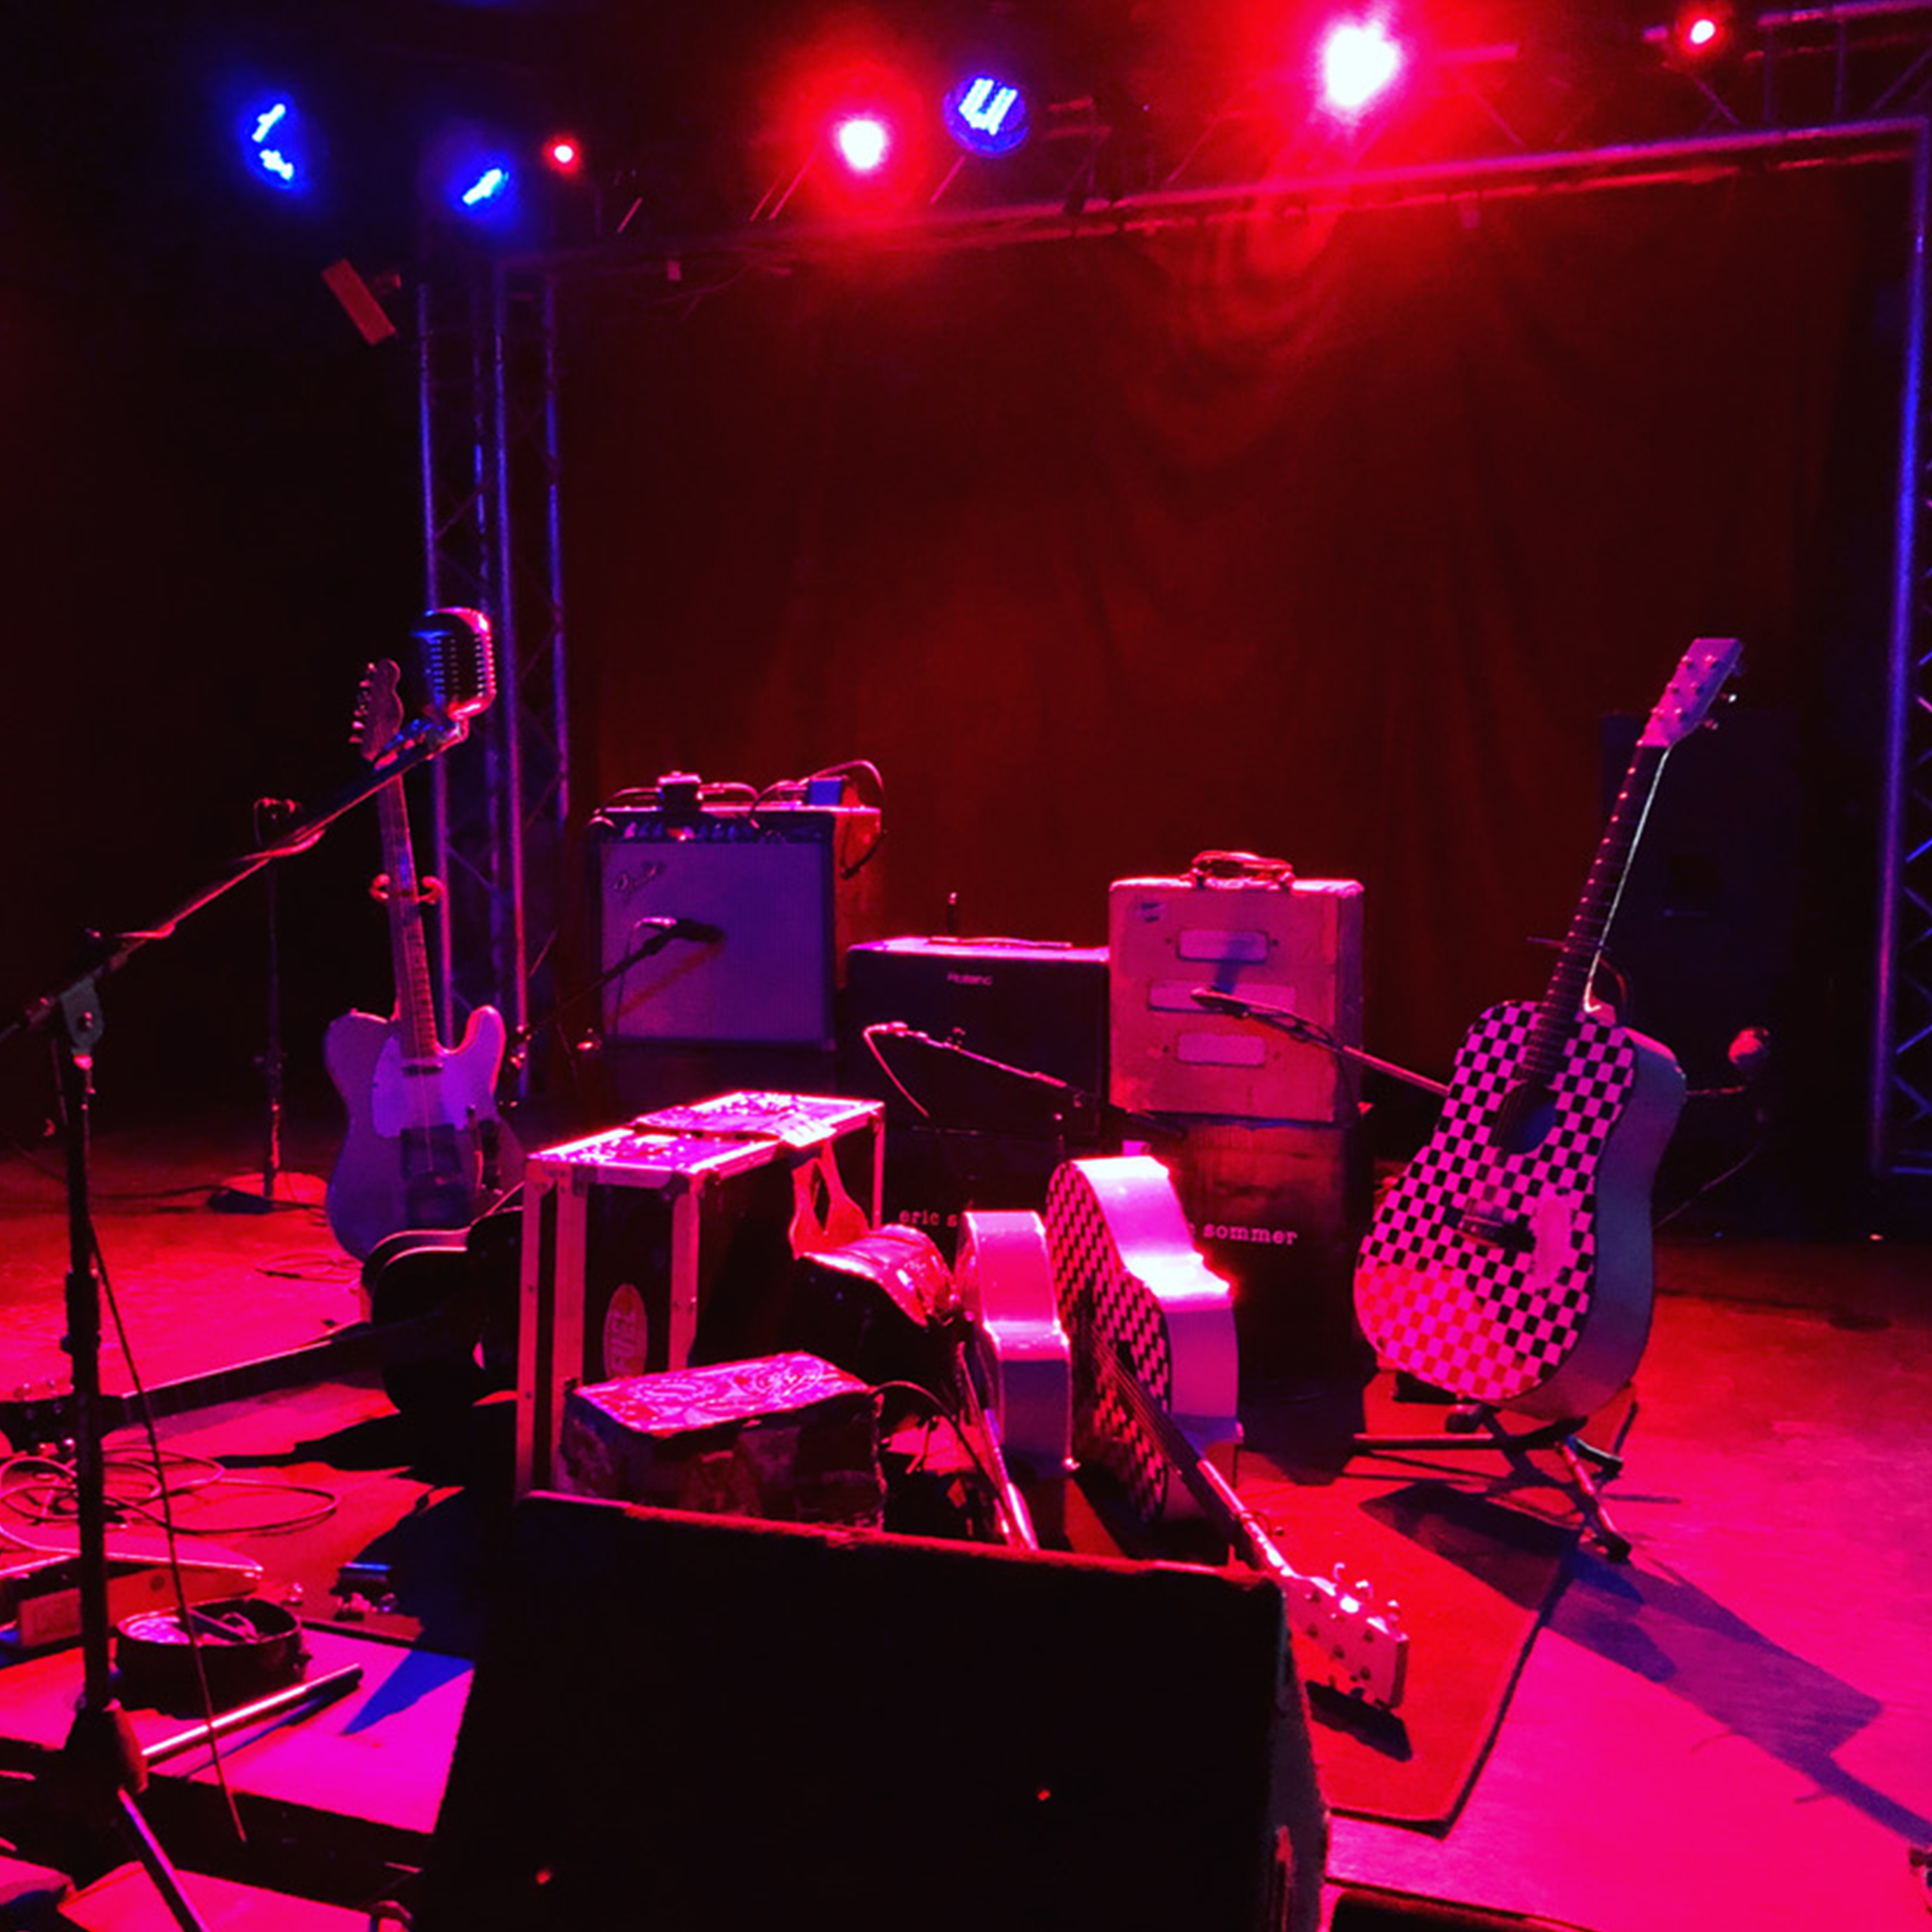 img src="jaxstage.png" alt="solo musician stage set in red light from the back">